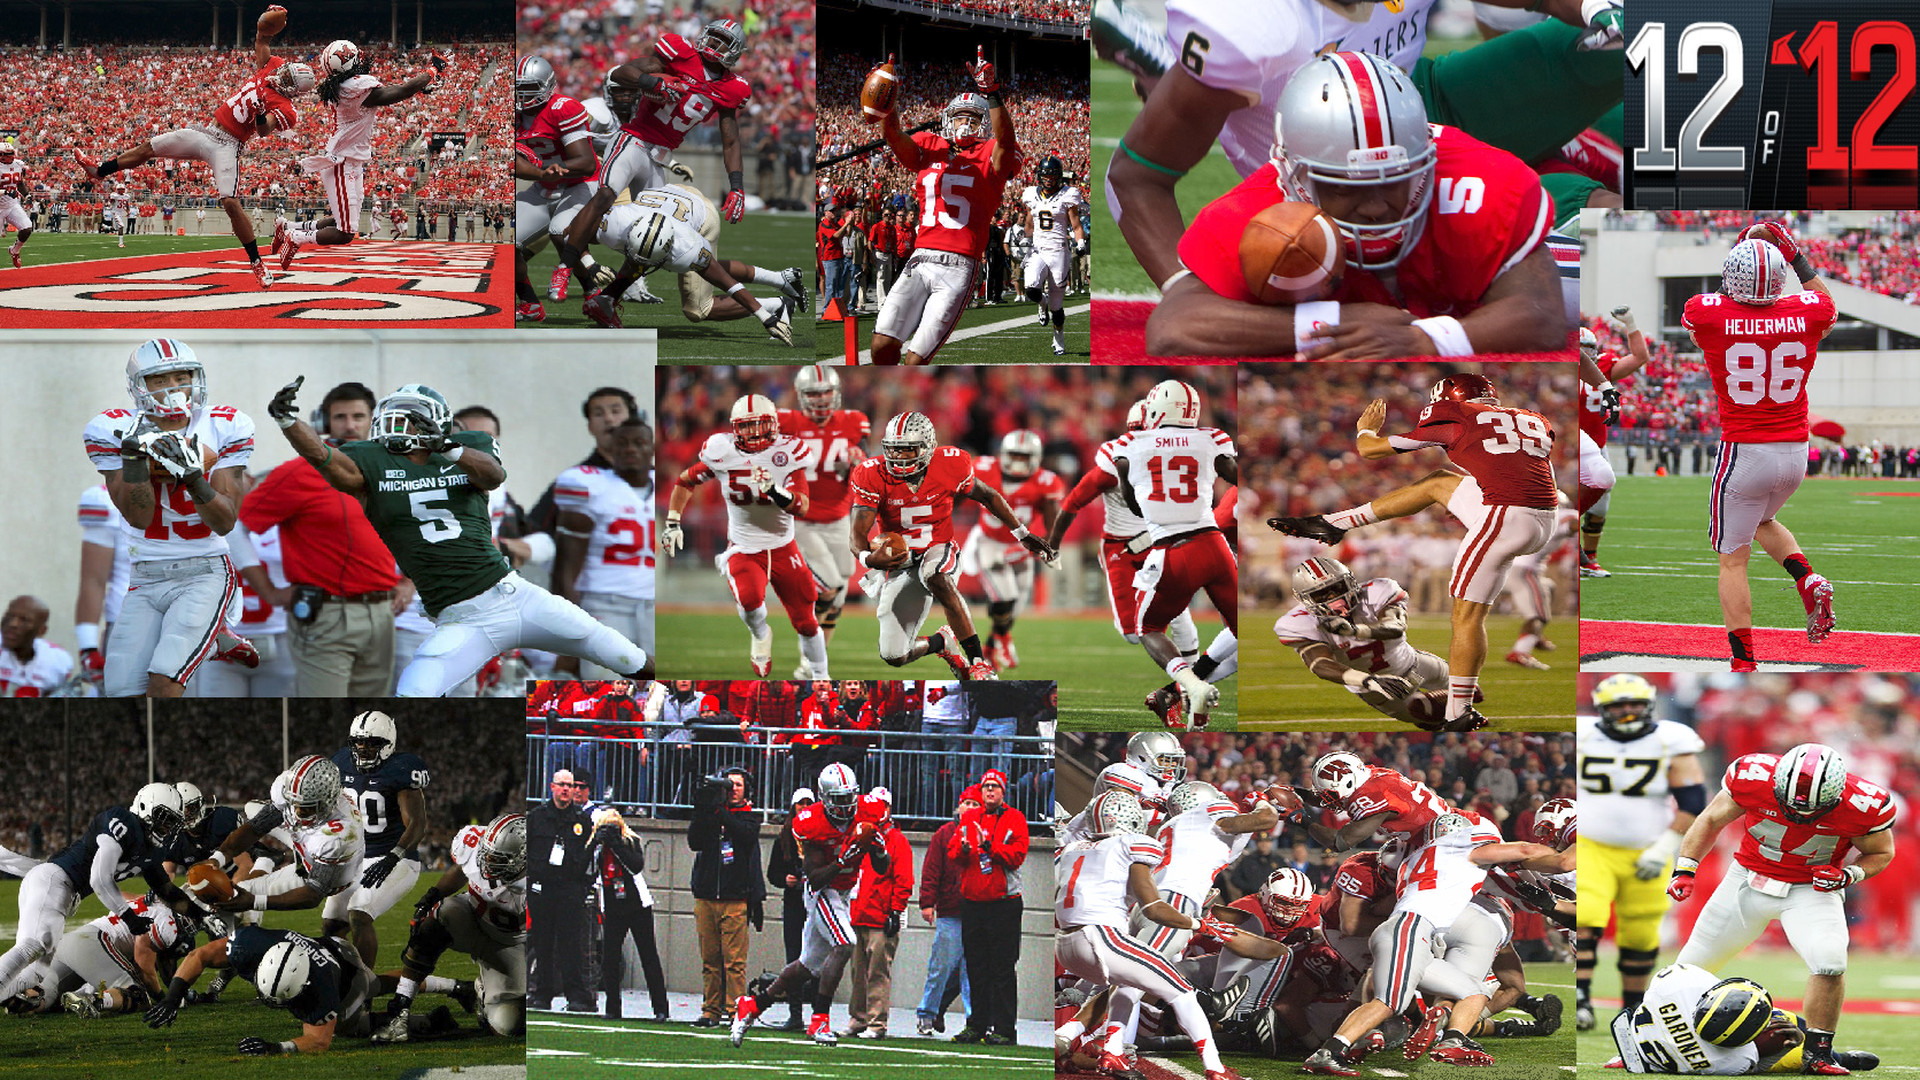 1920x1080 Osu Spring Game 2012 Wallpaper | HD Video Game Wallpapers